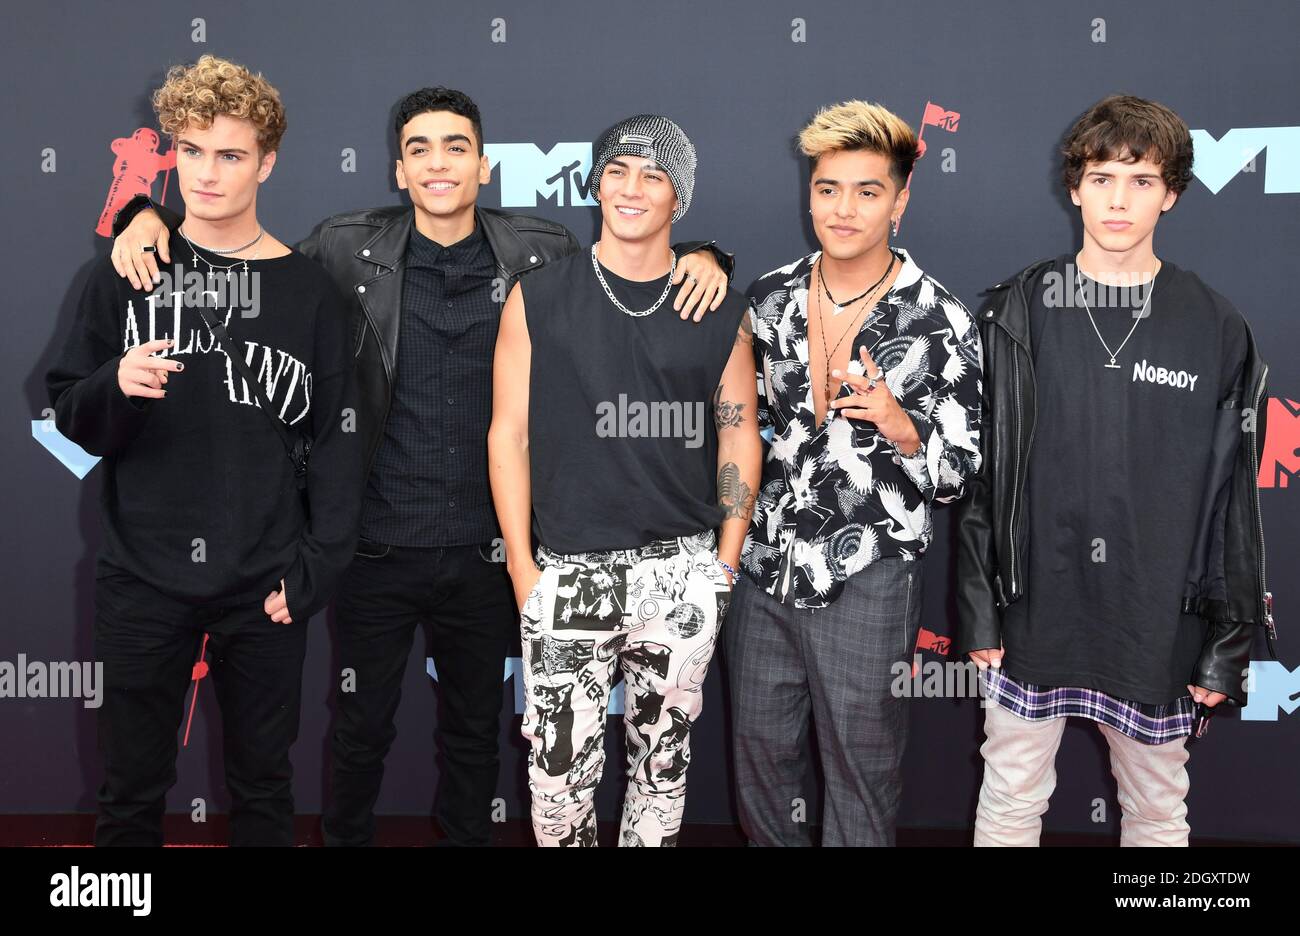 Brady Tutton, Drew Ramos, Chance Perez, Sergio Calderon and Conor Smith of the band In Real Life arriving at the MTV Video Music Awards 2019, held at the Prudential Centre in Newark, NJ. Photo credit should read: Doug Peters/EMPICS Stock Photo